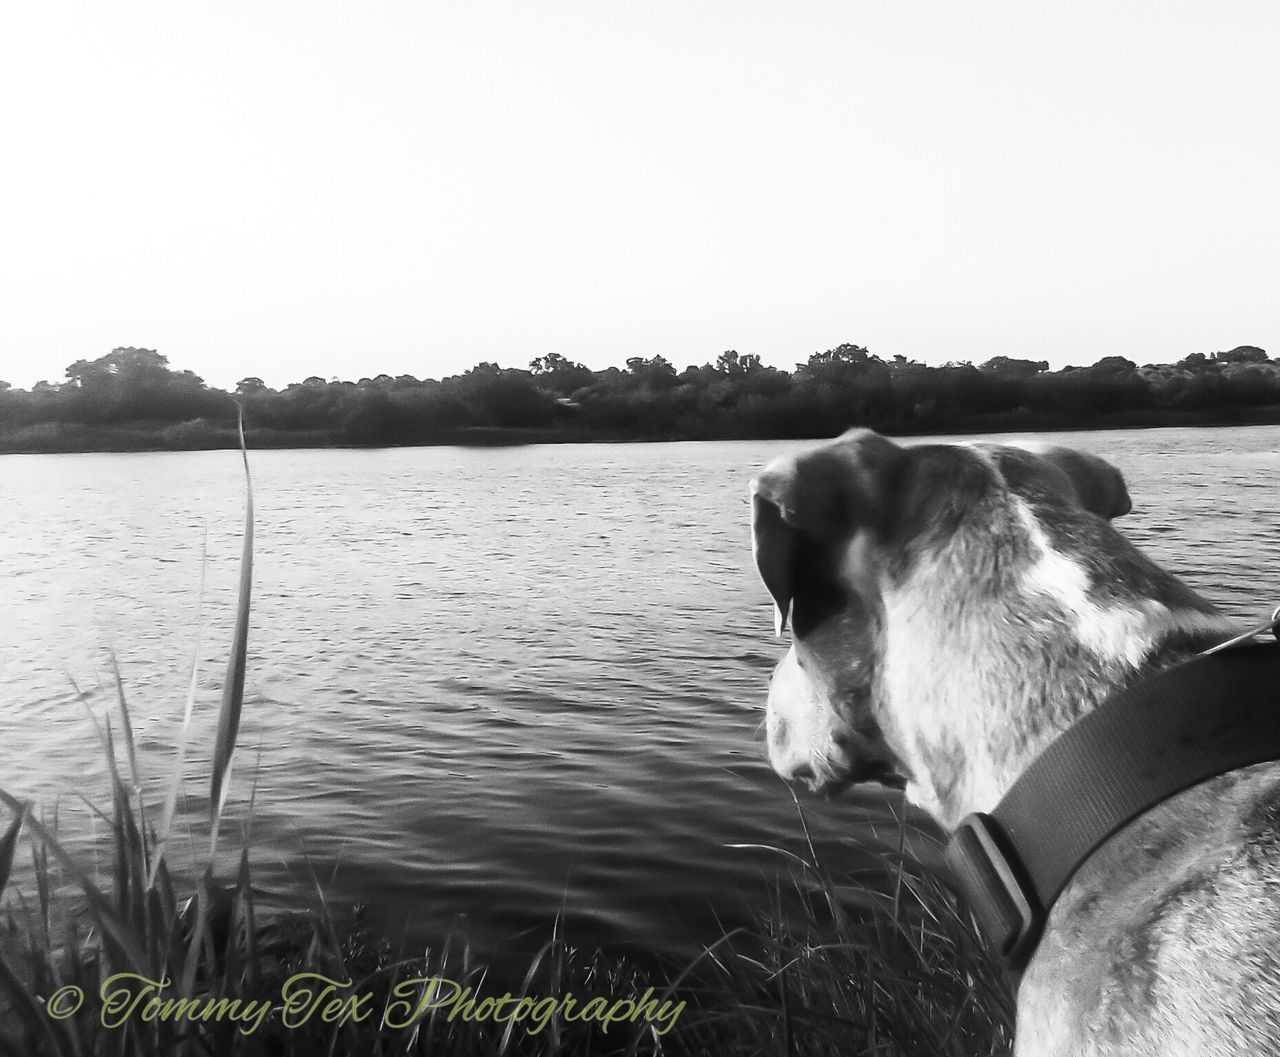 domestic animals, one animal, dog, pets, animal themes, mammal, water, lake, nature, outdoors, day, no people, clear sky, grass, sky